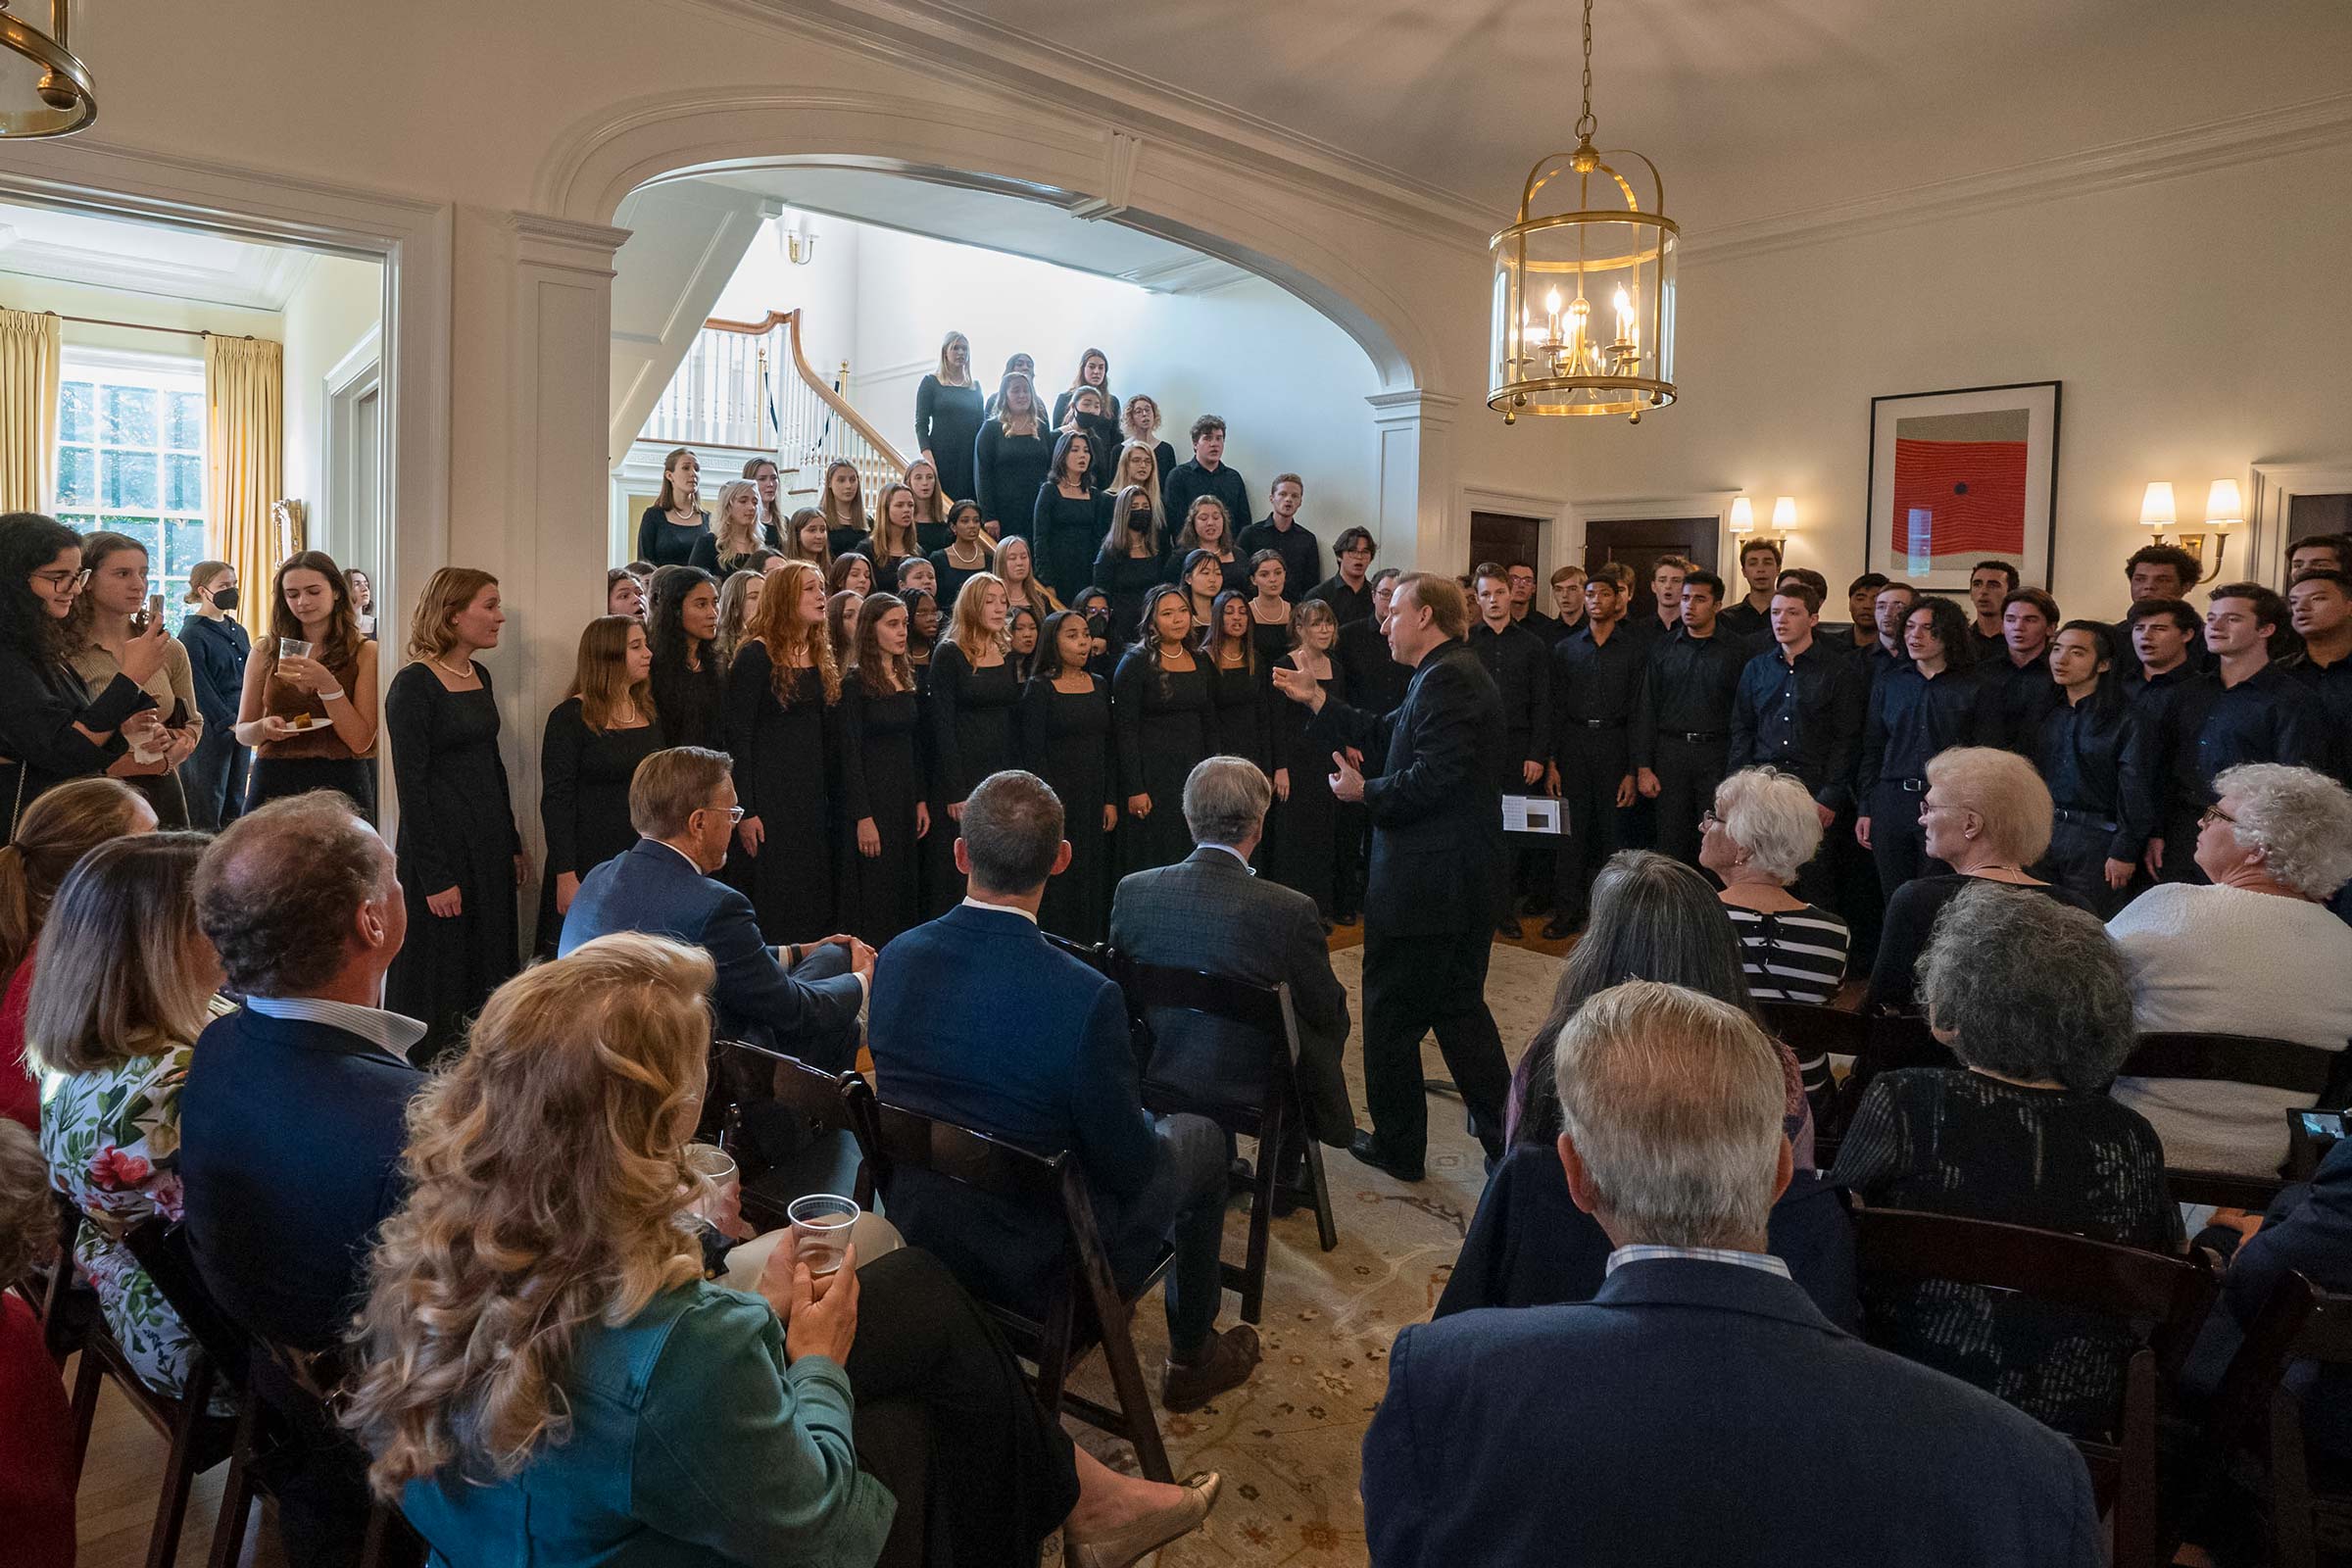 The University Singers perform Thursday afternoon in the foyer of Carr’s Hill. (Photo by Dan Addison, University Communications)